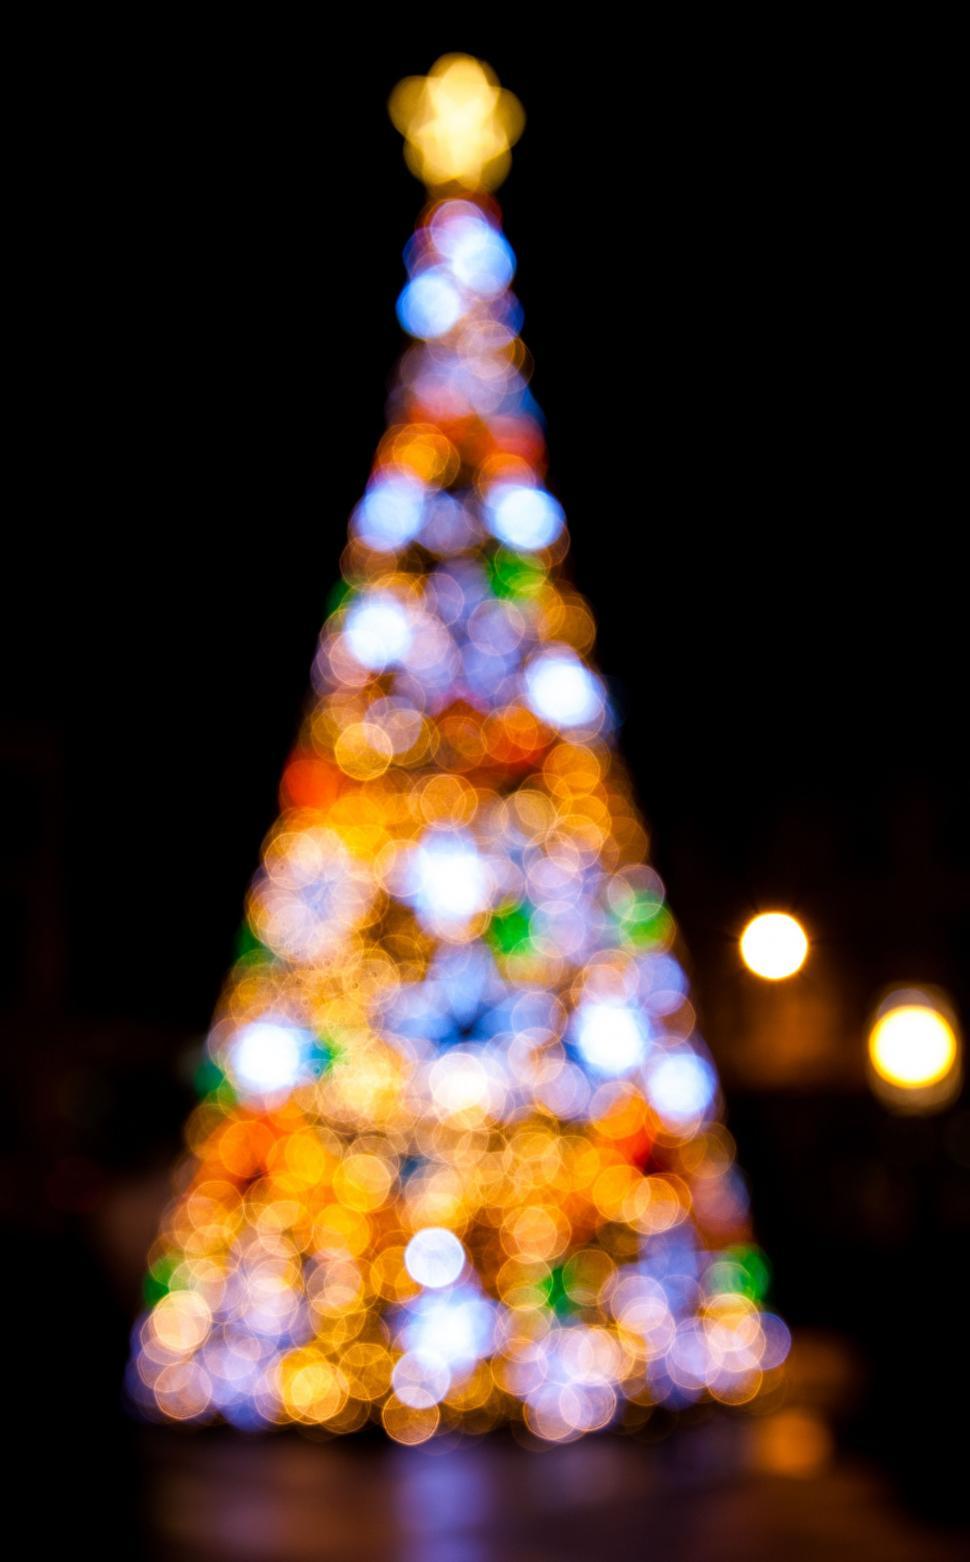 Free Image of Brightly Lit Christmas Tree in the Dark 